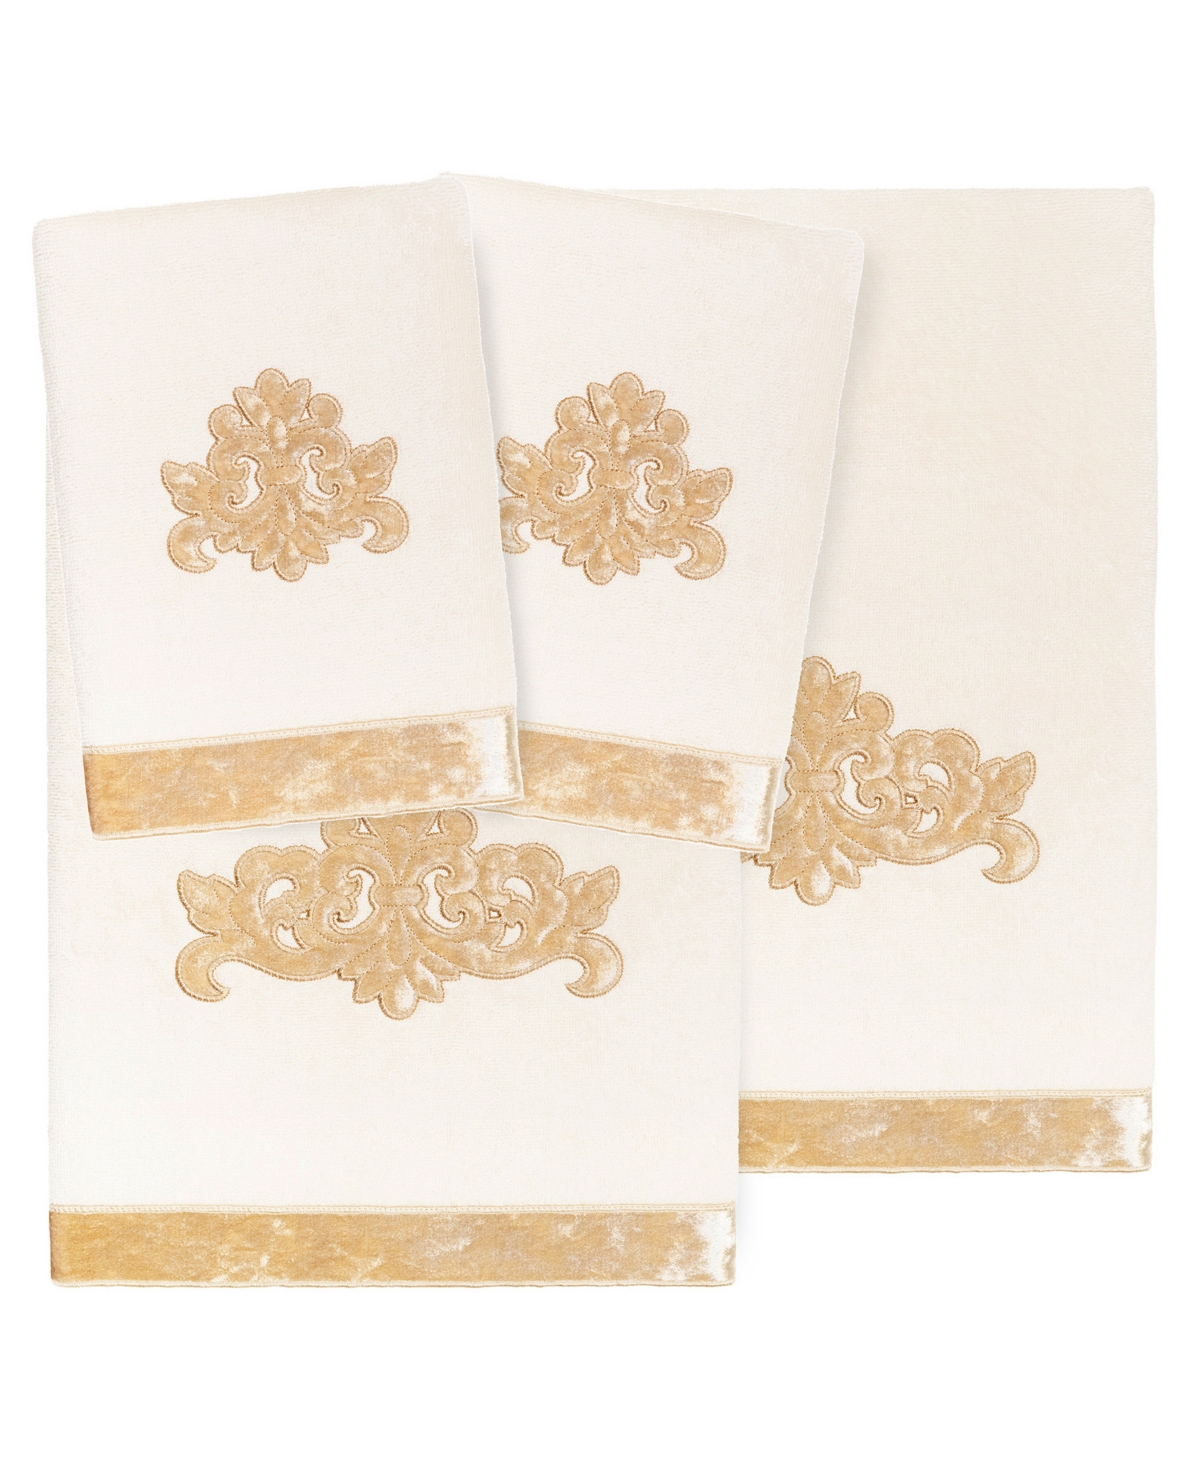 Linum Home Textiles Turkish Cotton May Embellished Towel Set, 4 Piece Bedding In Beige